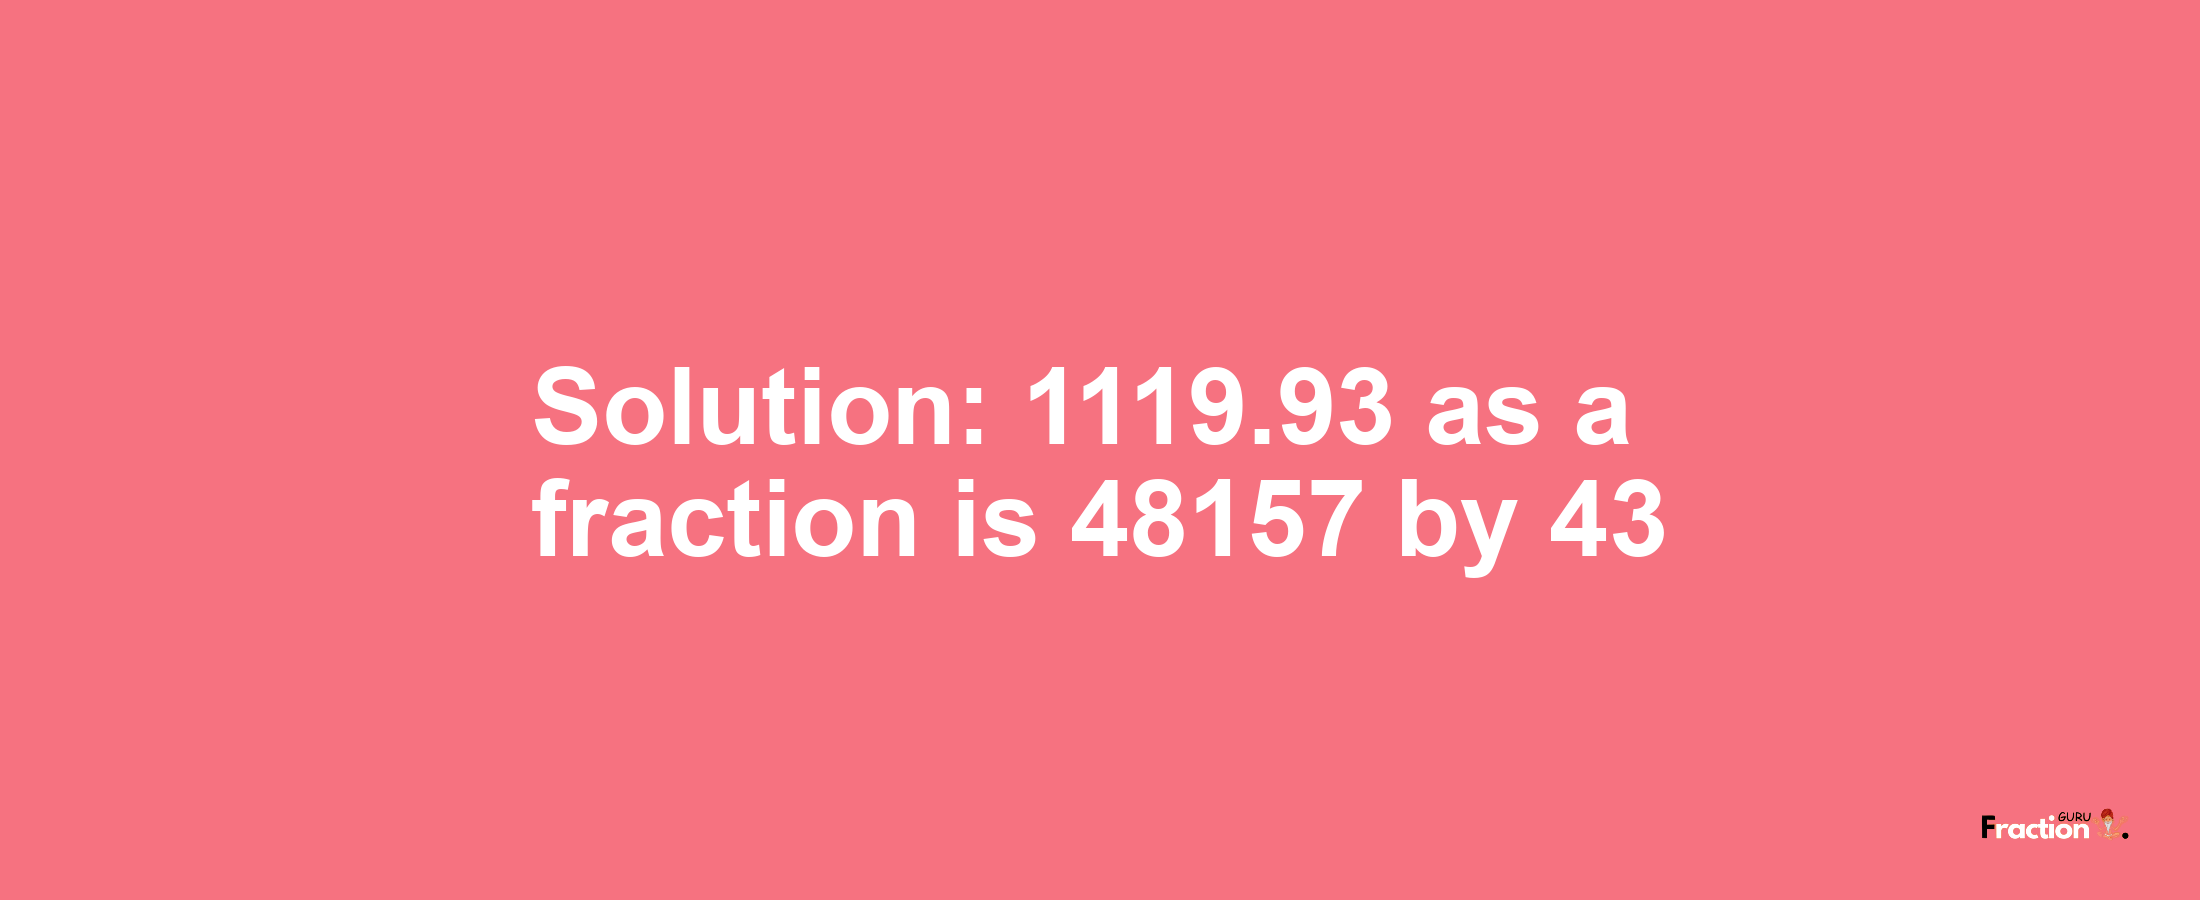 Solution:1119.93 as a fraction is 48157/43